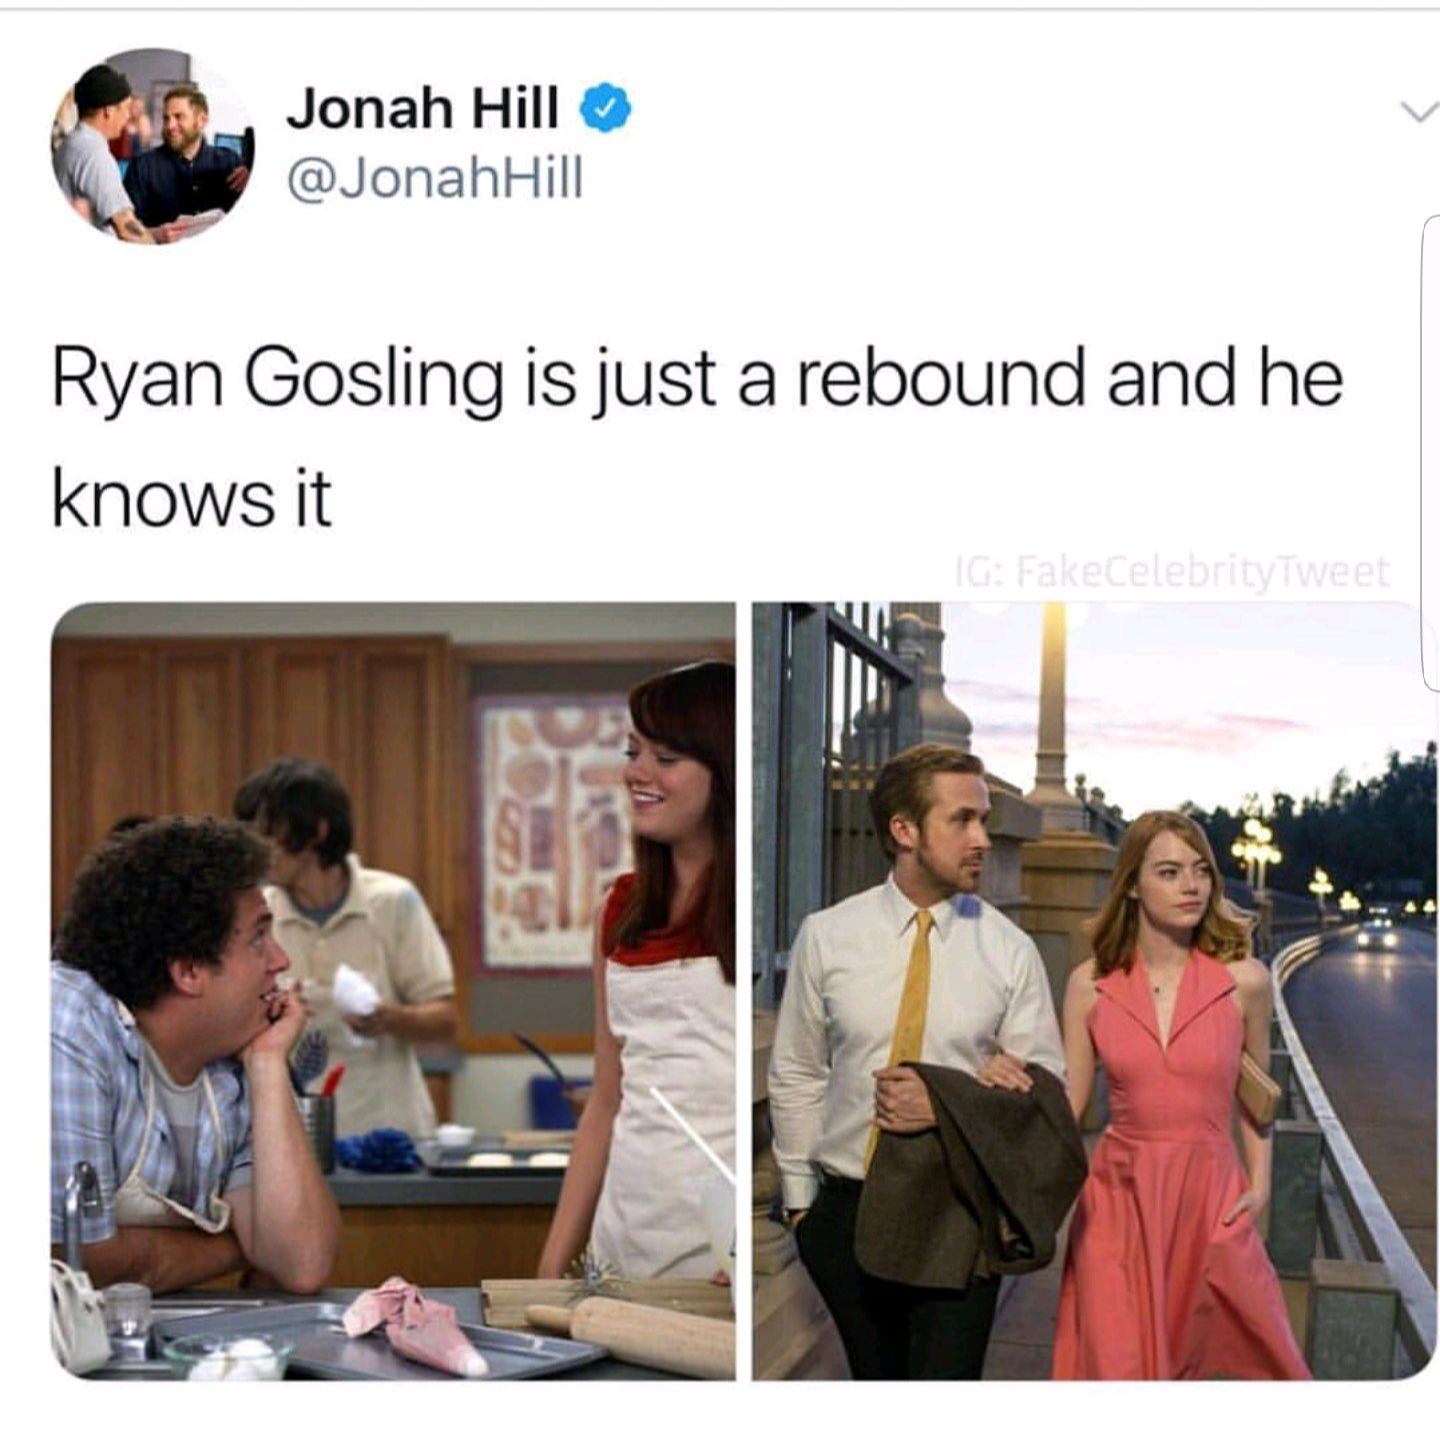 jonah hill ryan gosling - Jonah Hill Hill Ryan Gosling is just a rebound and he knows it 10 Fake Celebrity weet